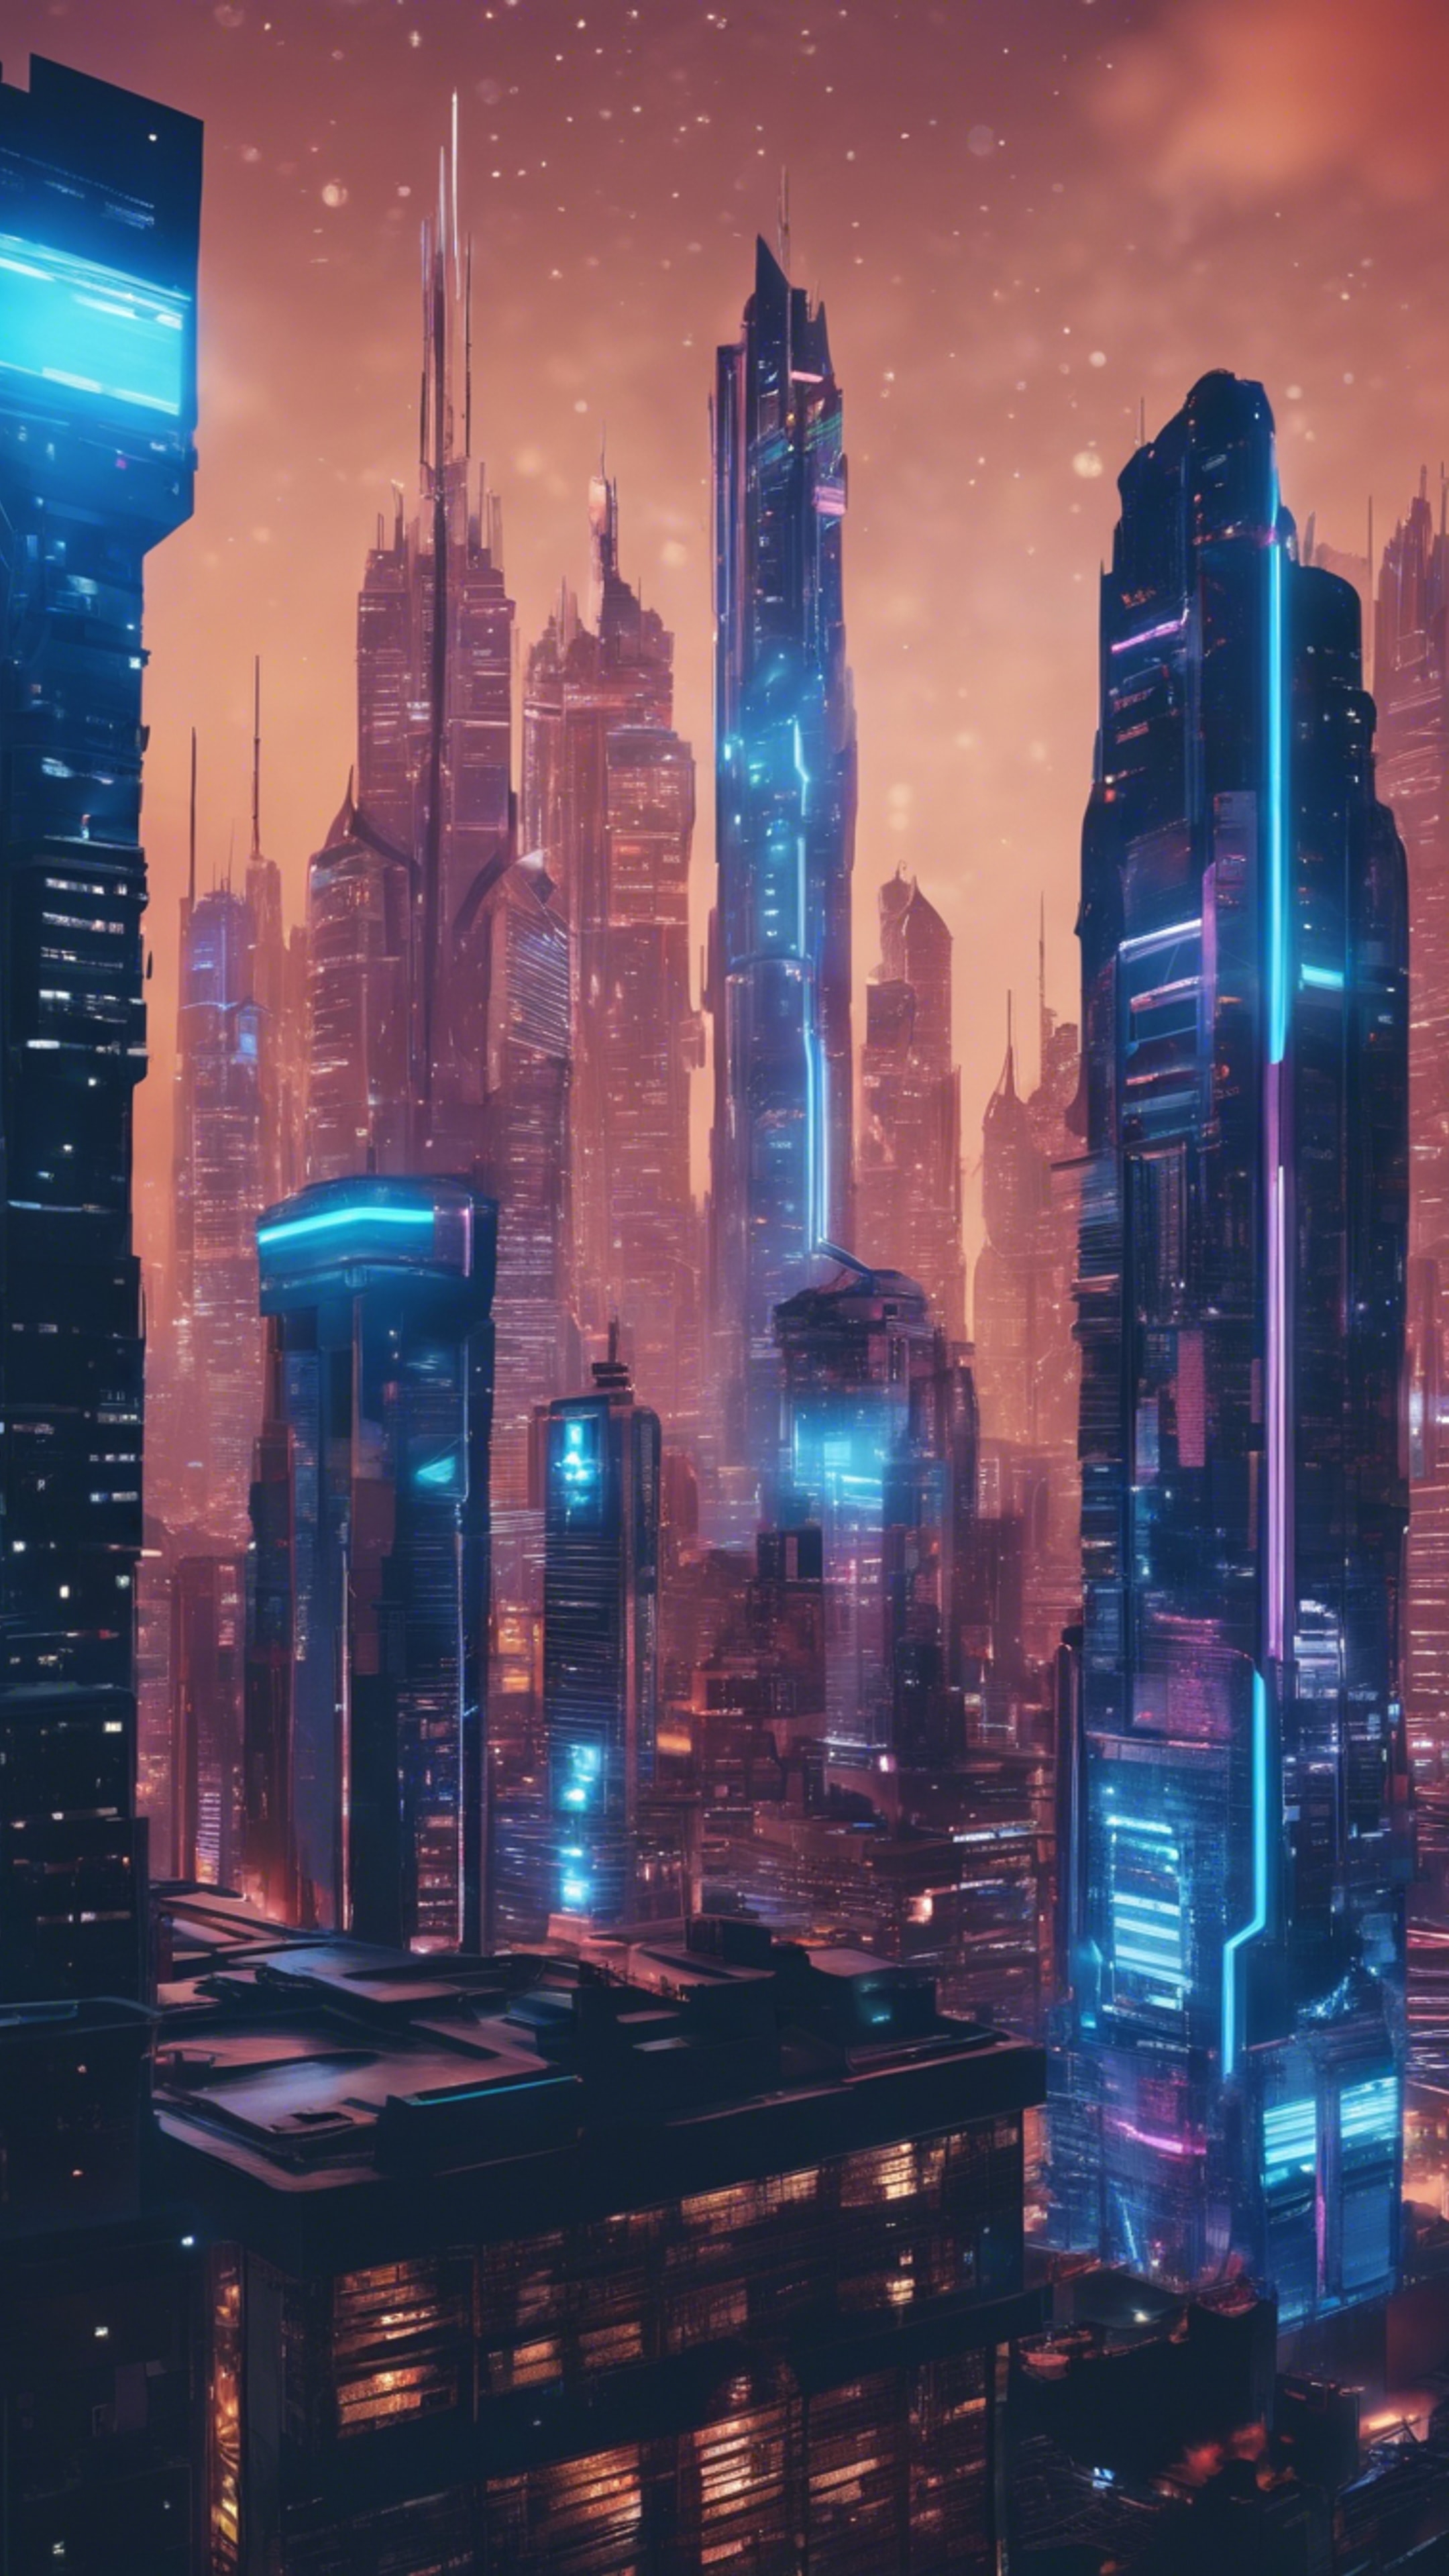 A futuristic city glowing with vibrant neon-blue lights and skyscrapers piercing the night sky. Tapeta[2f3a3bdee3e14a4e9359]